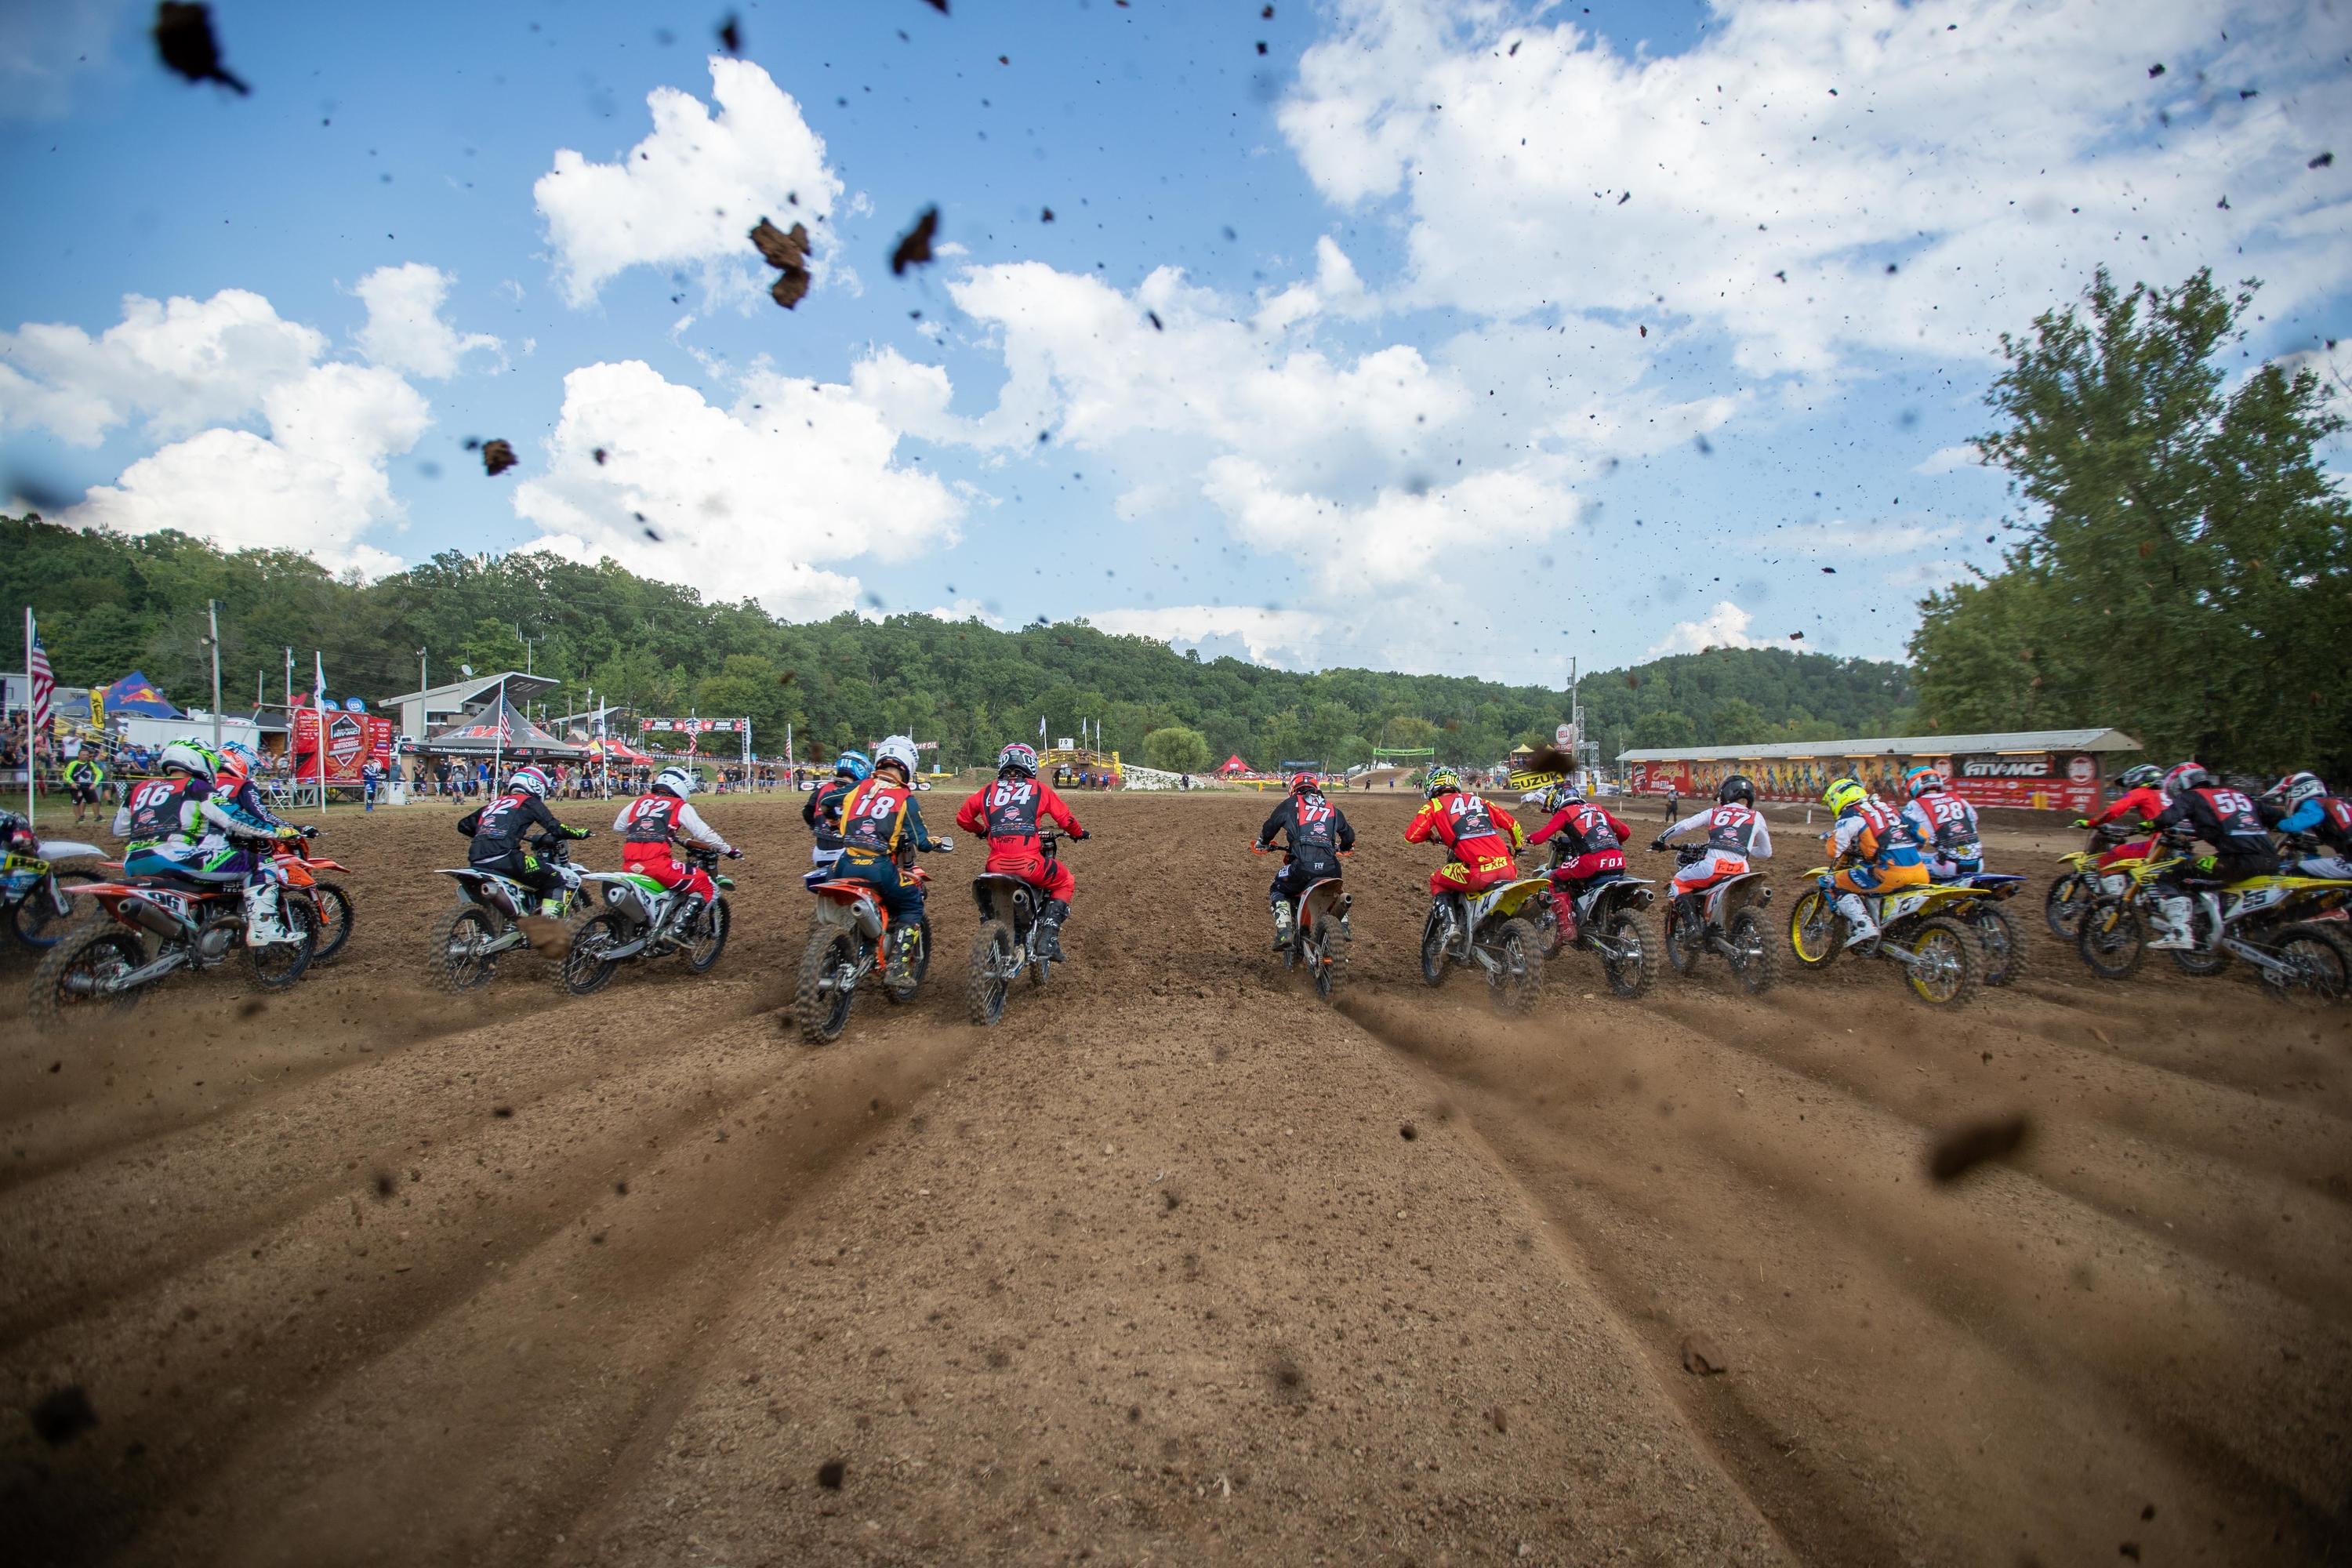 2020 AMA Amateur National Motocross Championship Area Qualifier and Regional Championship Dates Announced